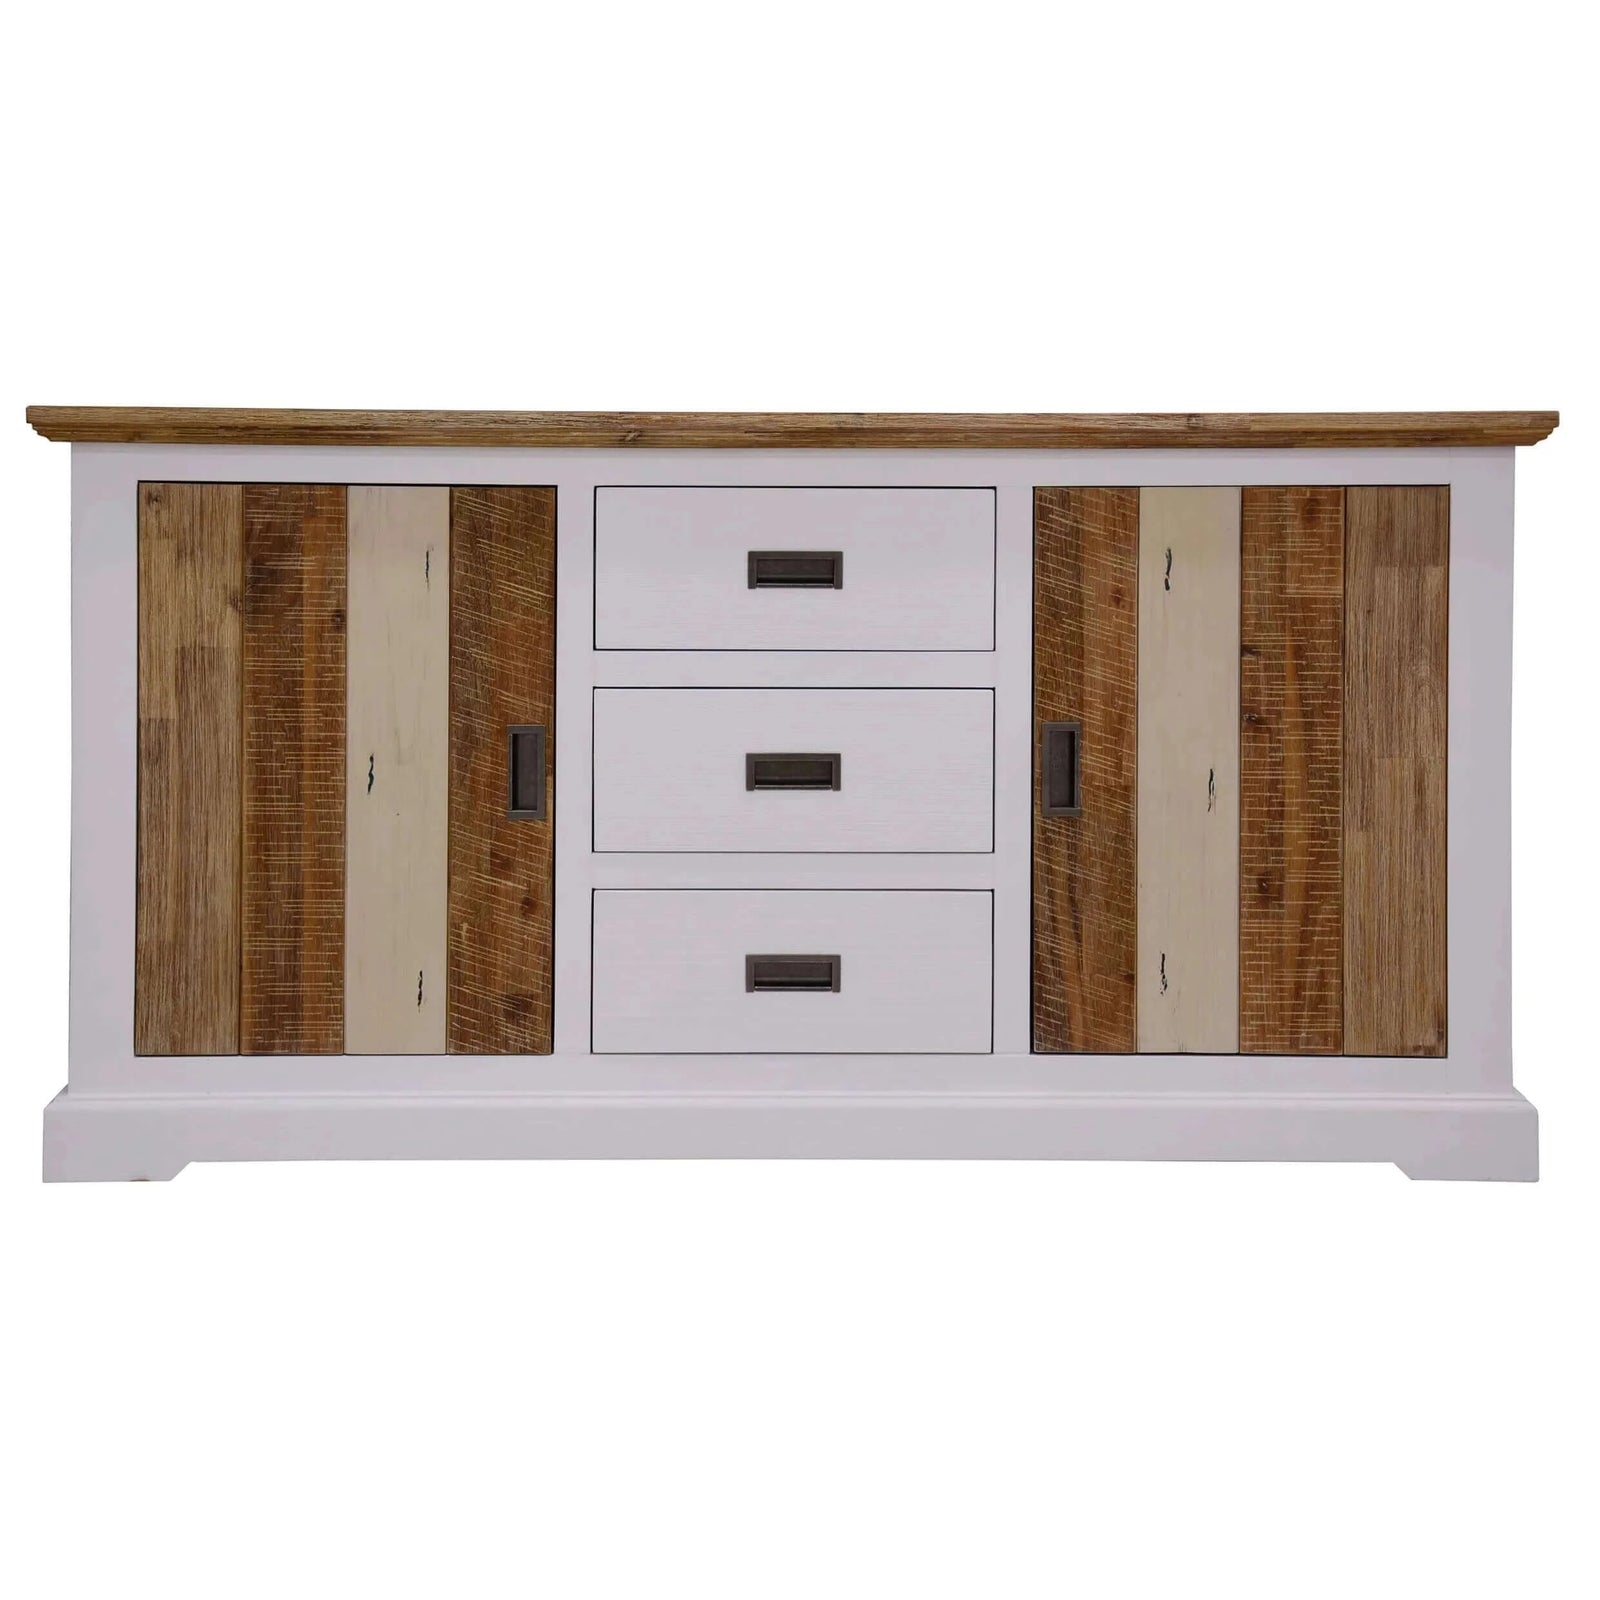 Buy orville buffet table 166cm 2 door 3 drawer solid acacia timber wood -multi color - upinteriors-Upinteriors